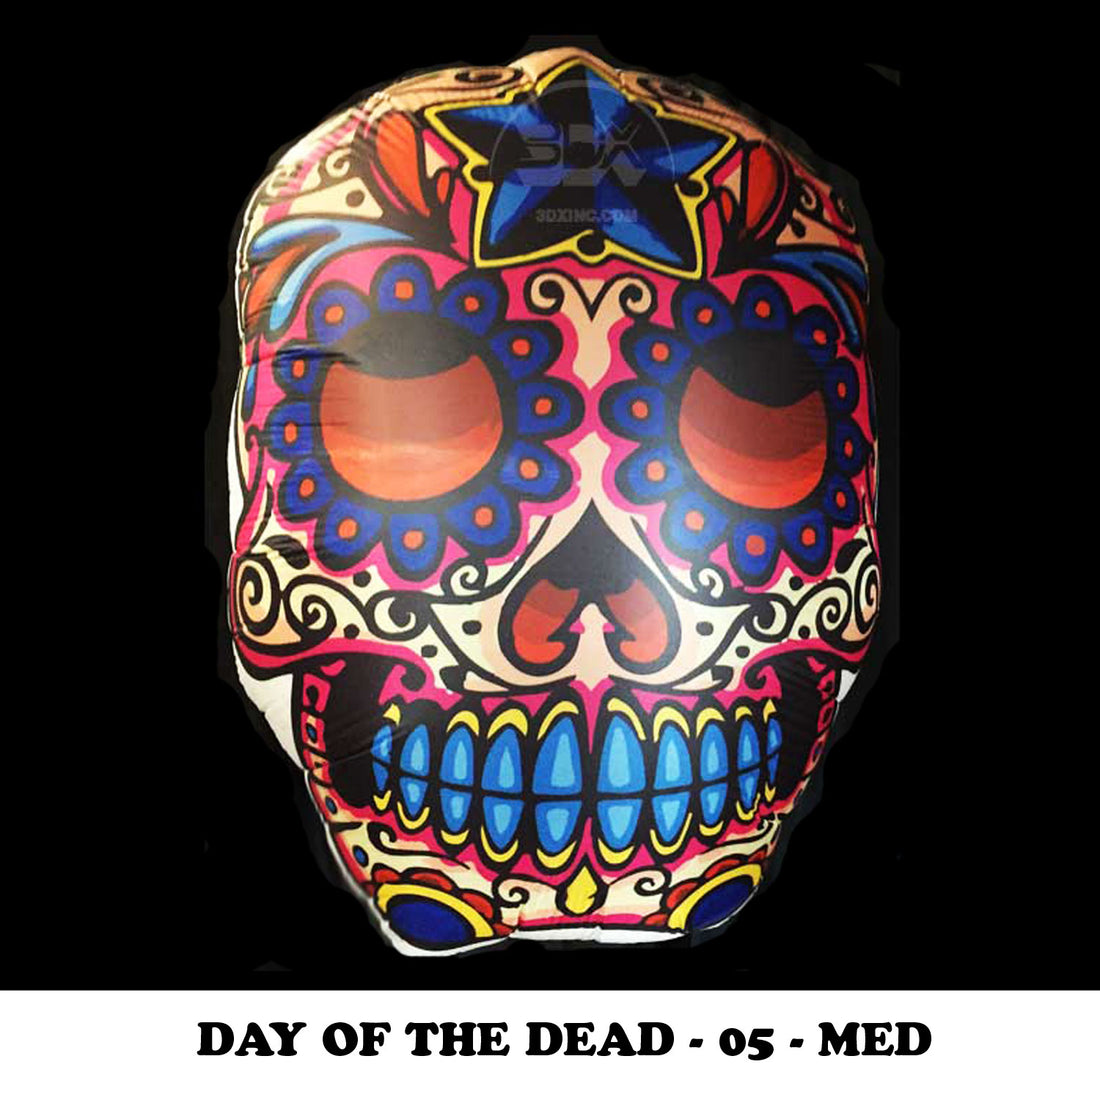 DAY OF THE DEAD - 05 - MED